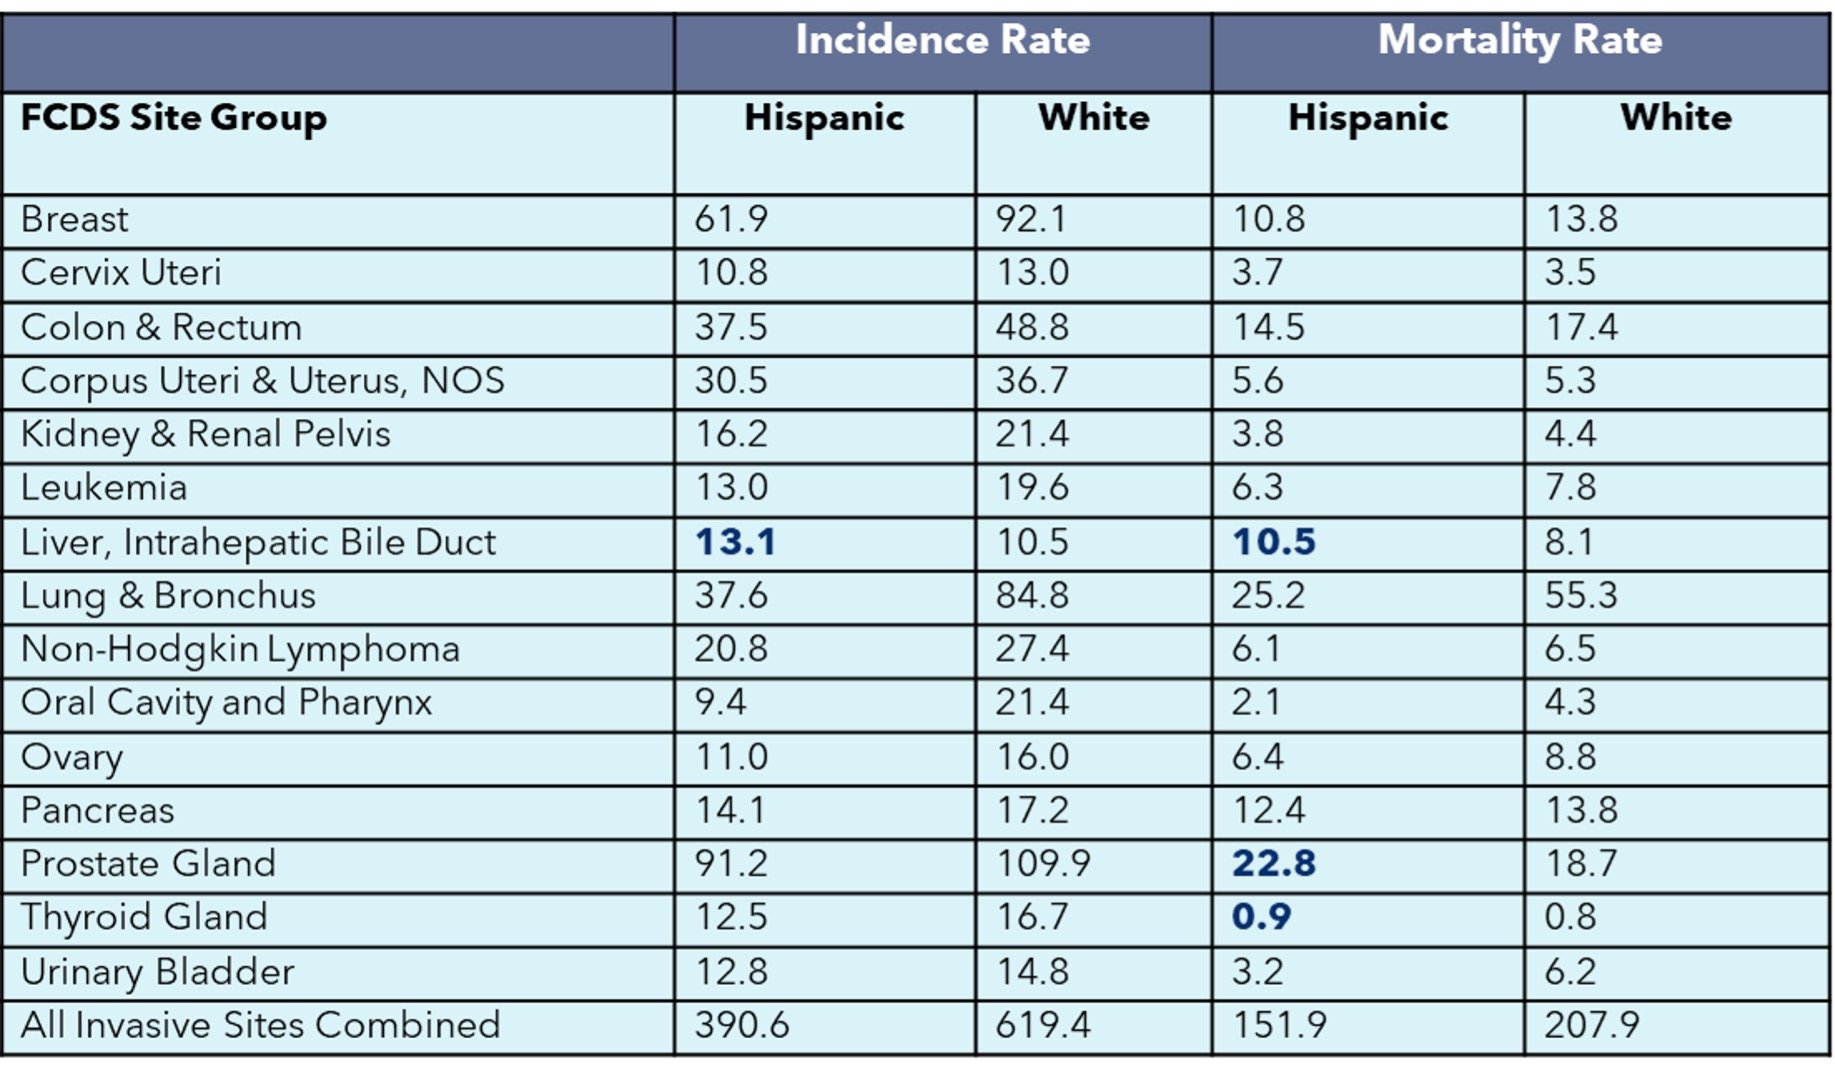 Top 15 Incidence Rates chart